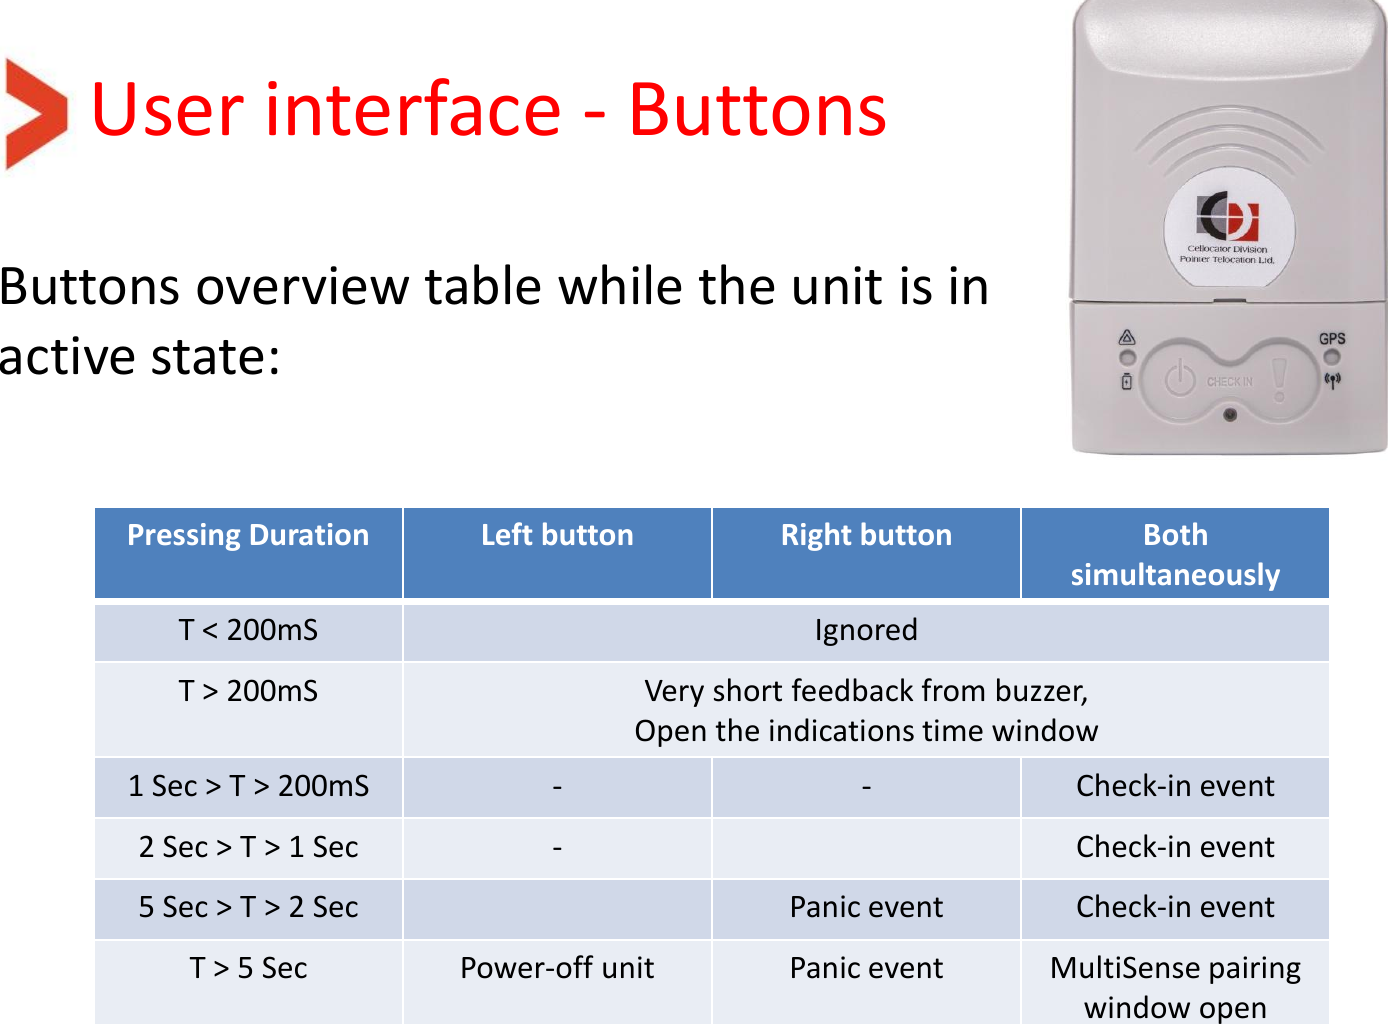 User interface - Buttons Buttons overview table while the unit is in active state:  Pressing Duration Left button Right button Both simultaneously  T &lt; 200mS Ignored T &gt; 200mS Very short feedback from buzzer, Open the indications time window 1 Sec &gt; T &gt; 200mS - - Check-in event 2 Sec &gt; T &gt; 1 Sec - Check-in event 5 Sec &gt; T &gt; 2 Sec Panic event Check-in event T &gt; 5 Sec  Power-off unit Panic event  MultiSense pairing window open 